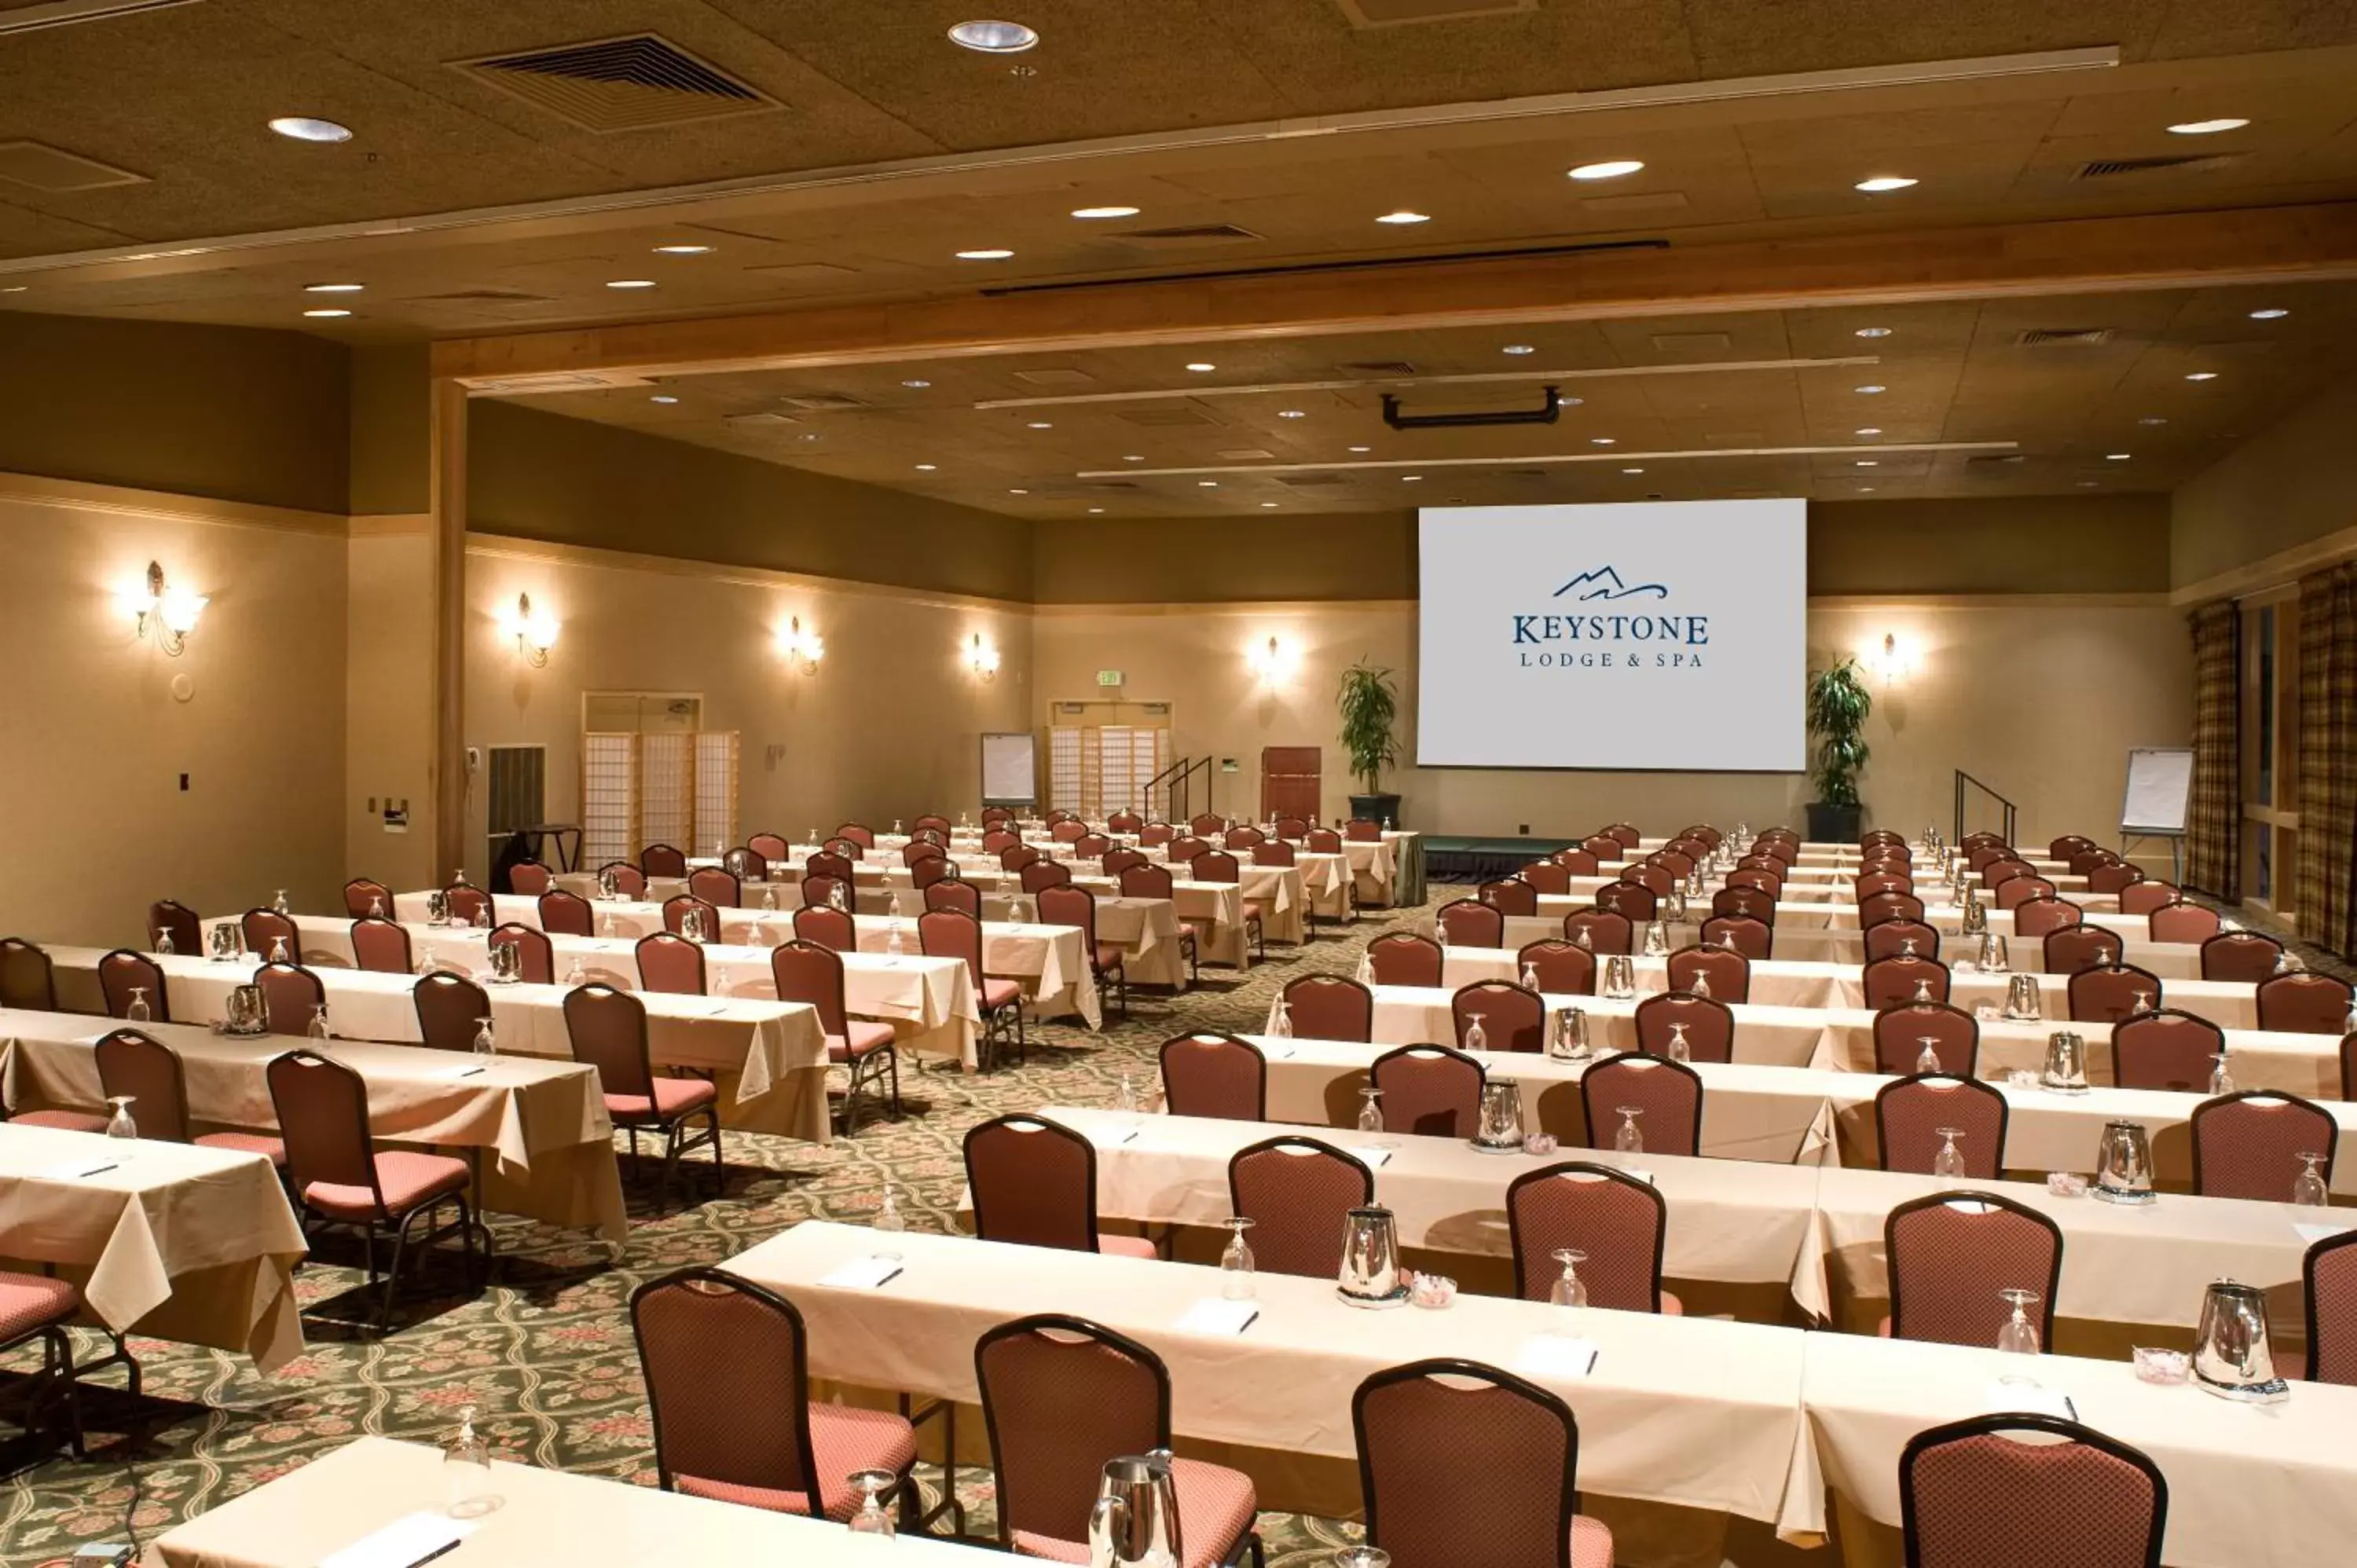 Business facilities in The Keystone Lodge and Spa by Keystone Resort